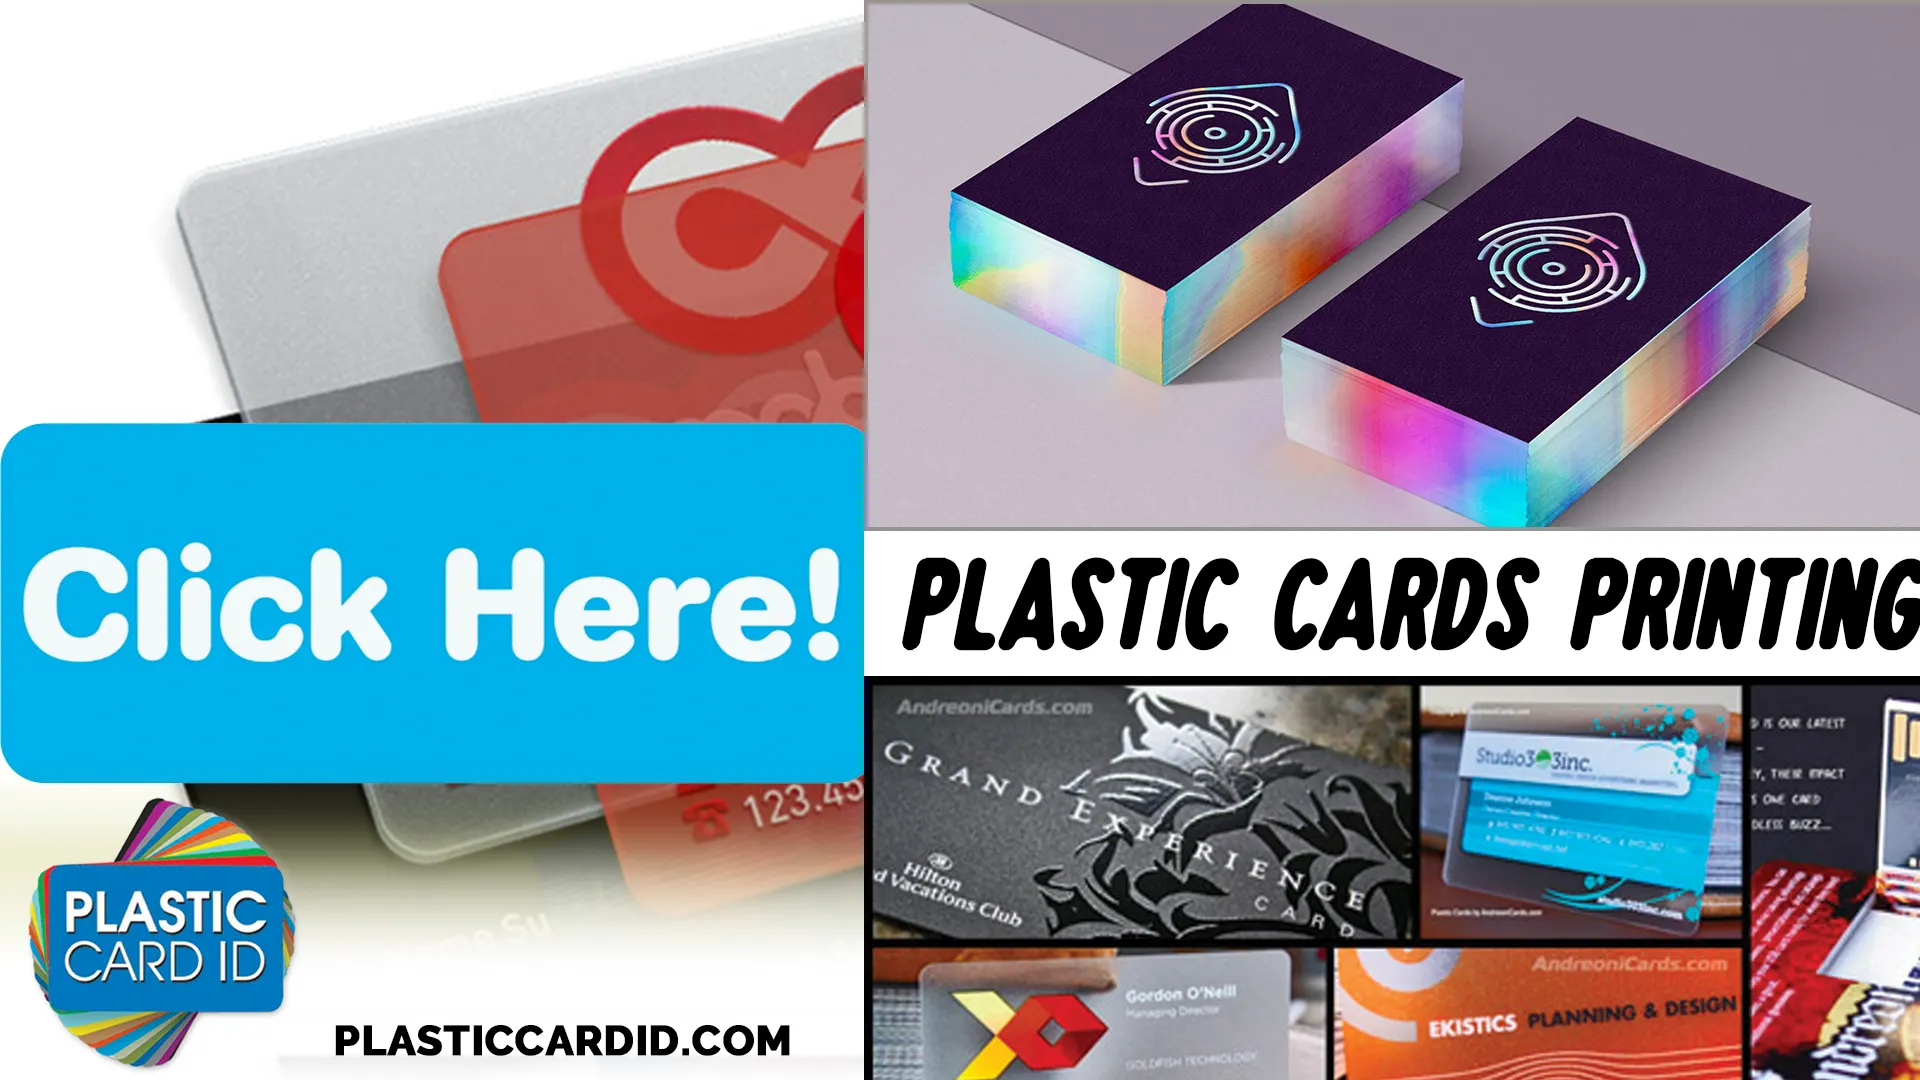 Creating Memorable Key Tag Designs with Plastic Card ID
